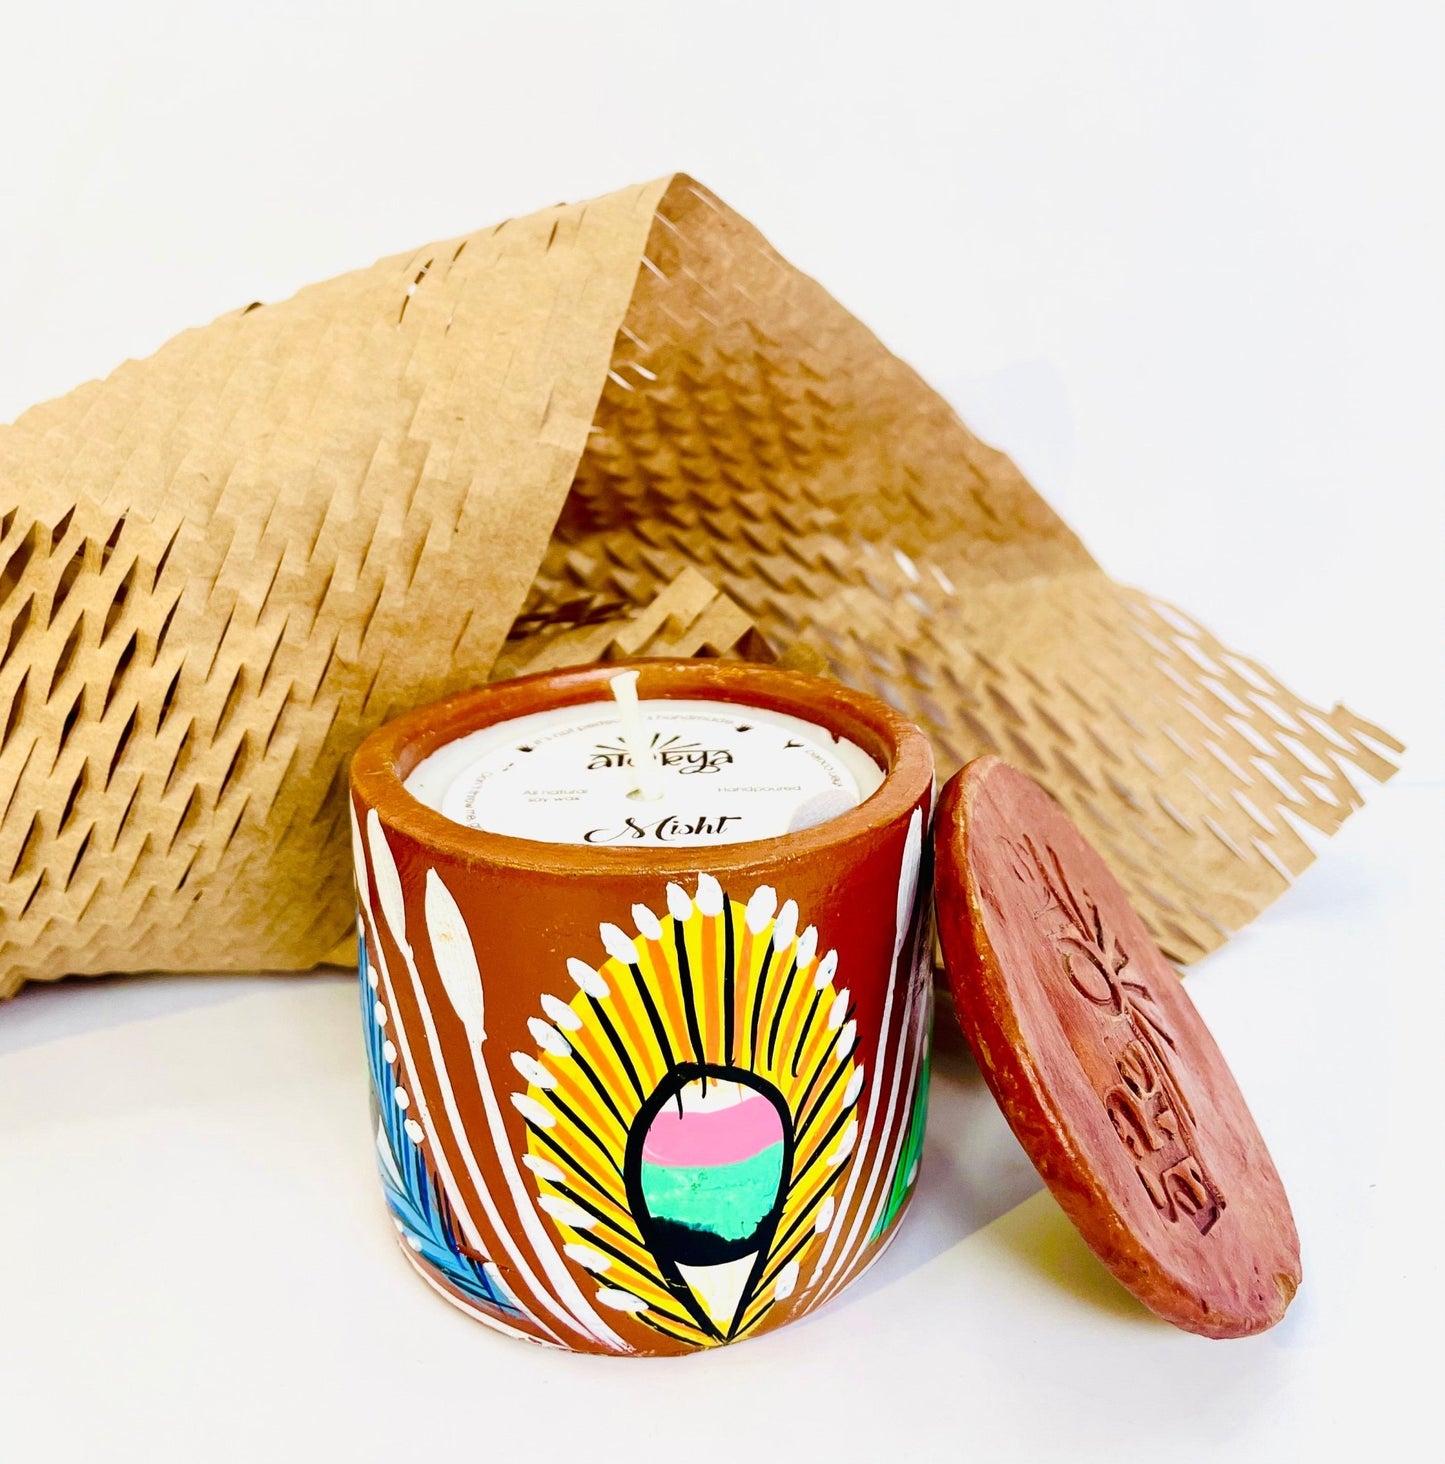 100% natural soy wax scented candle in a terracotta jar hand-painted with yellow feathers is covered with a seed paper candle dust cover while honeycomb paper and candle snuffer are placed around the candle